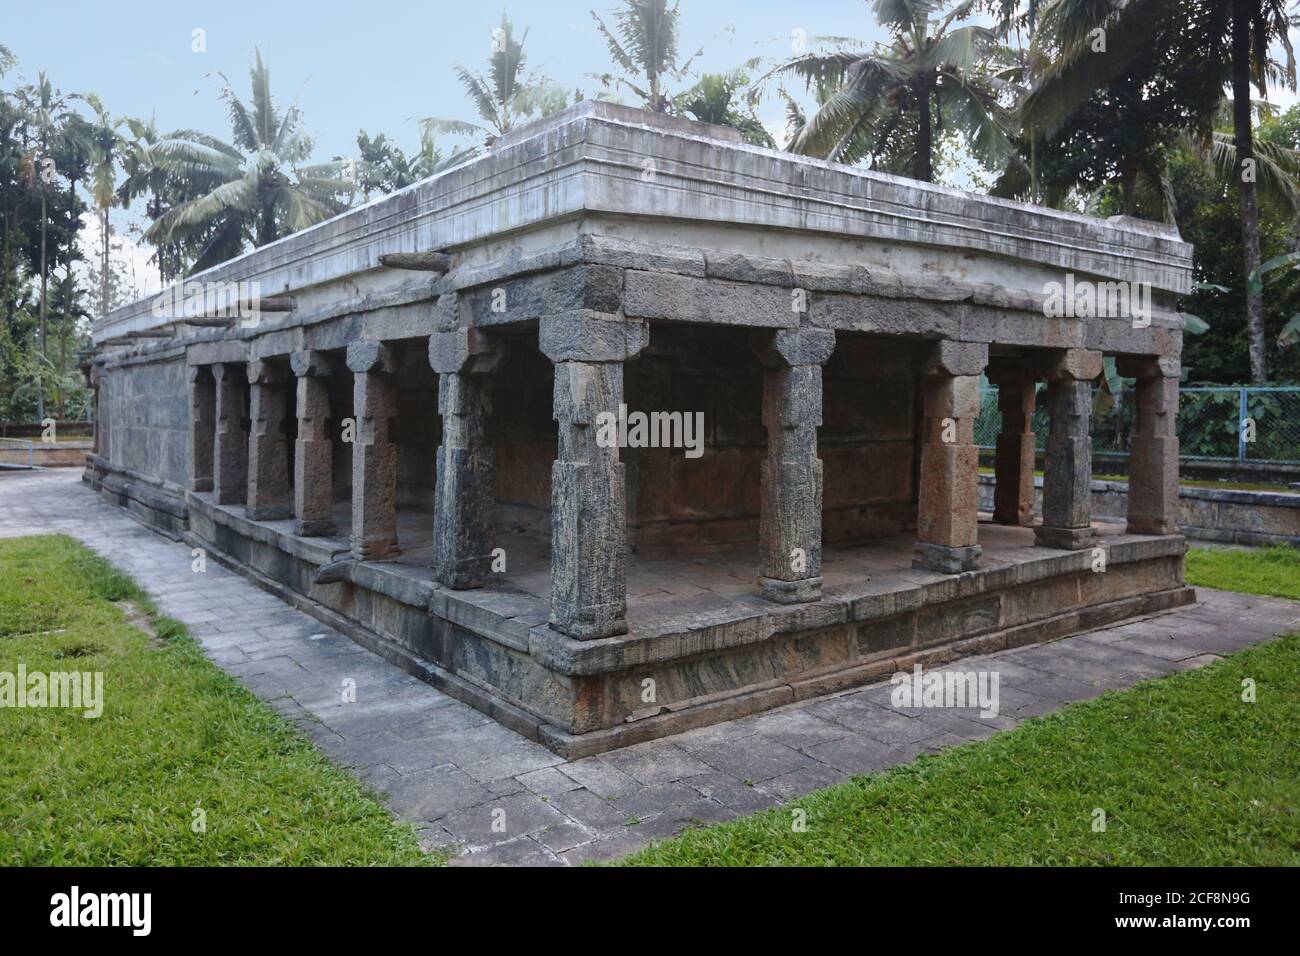 Jain Temple, Kidanganad, Sultan Bathery, Kerala, India. Date established. 13th Century. The temple is a protected monument under the Archaeological Su Stock Photo